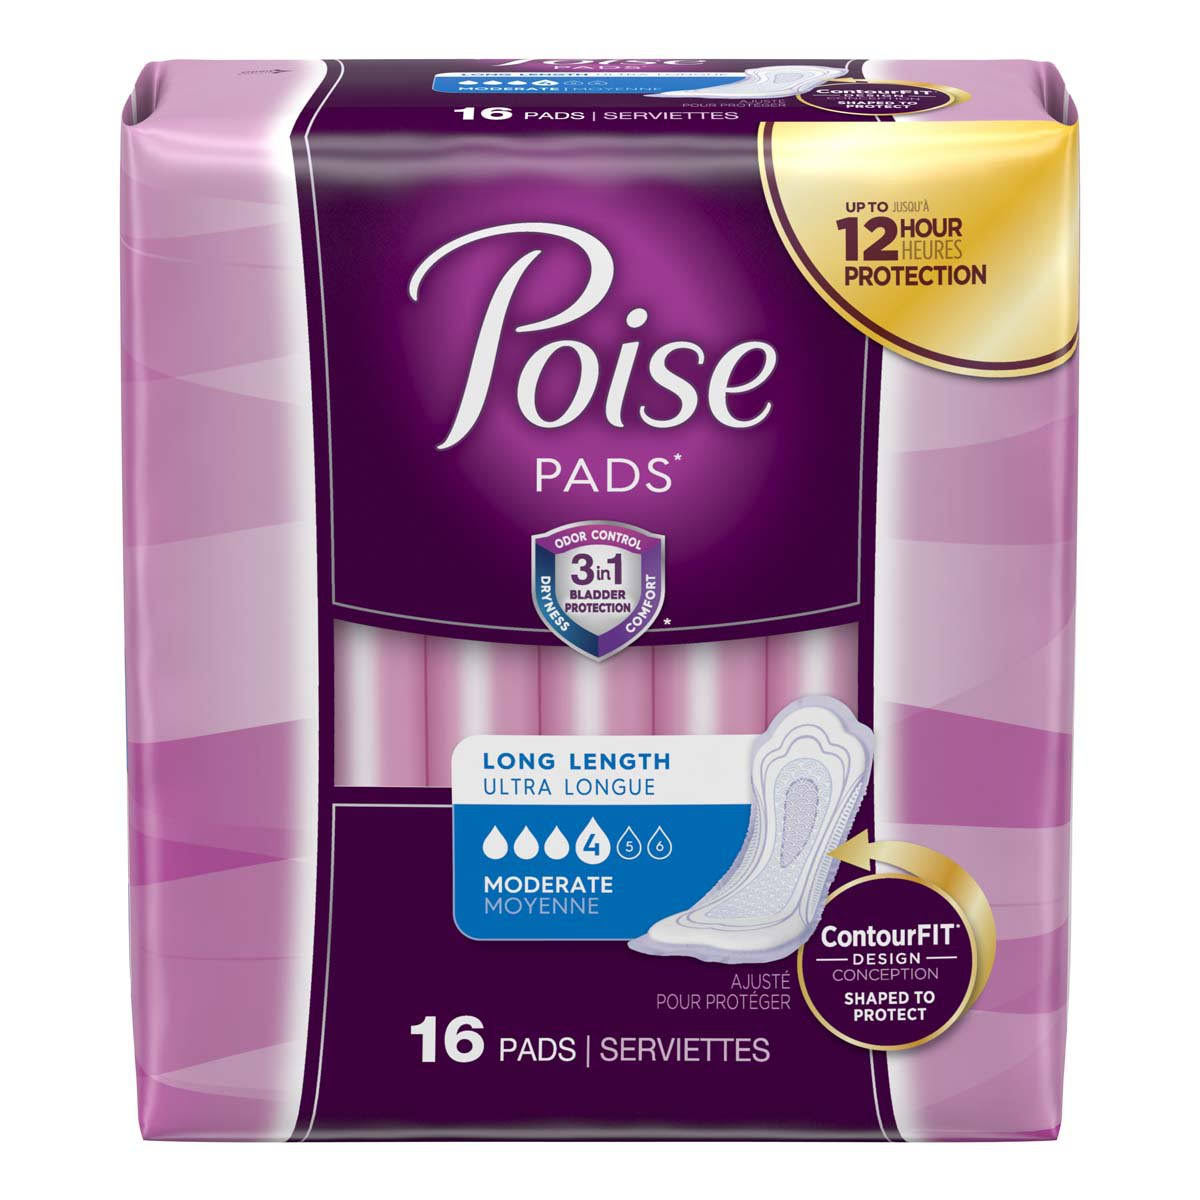 Poise Pads - 16 Pads, Moderate Absorbency